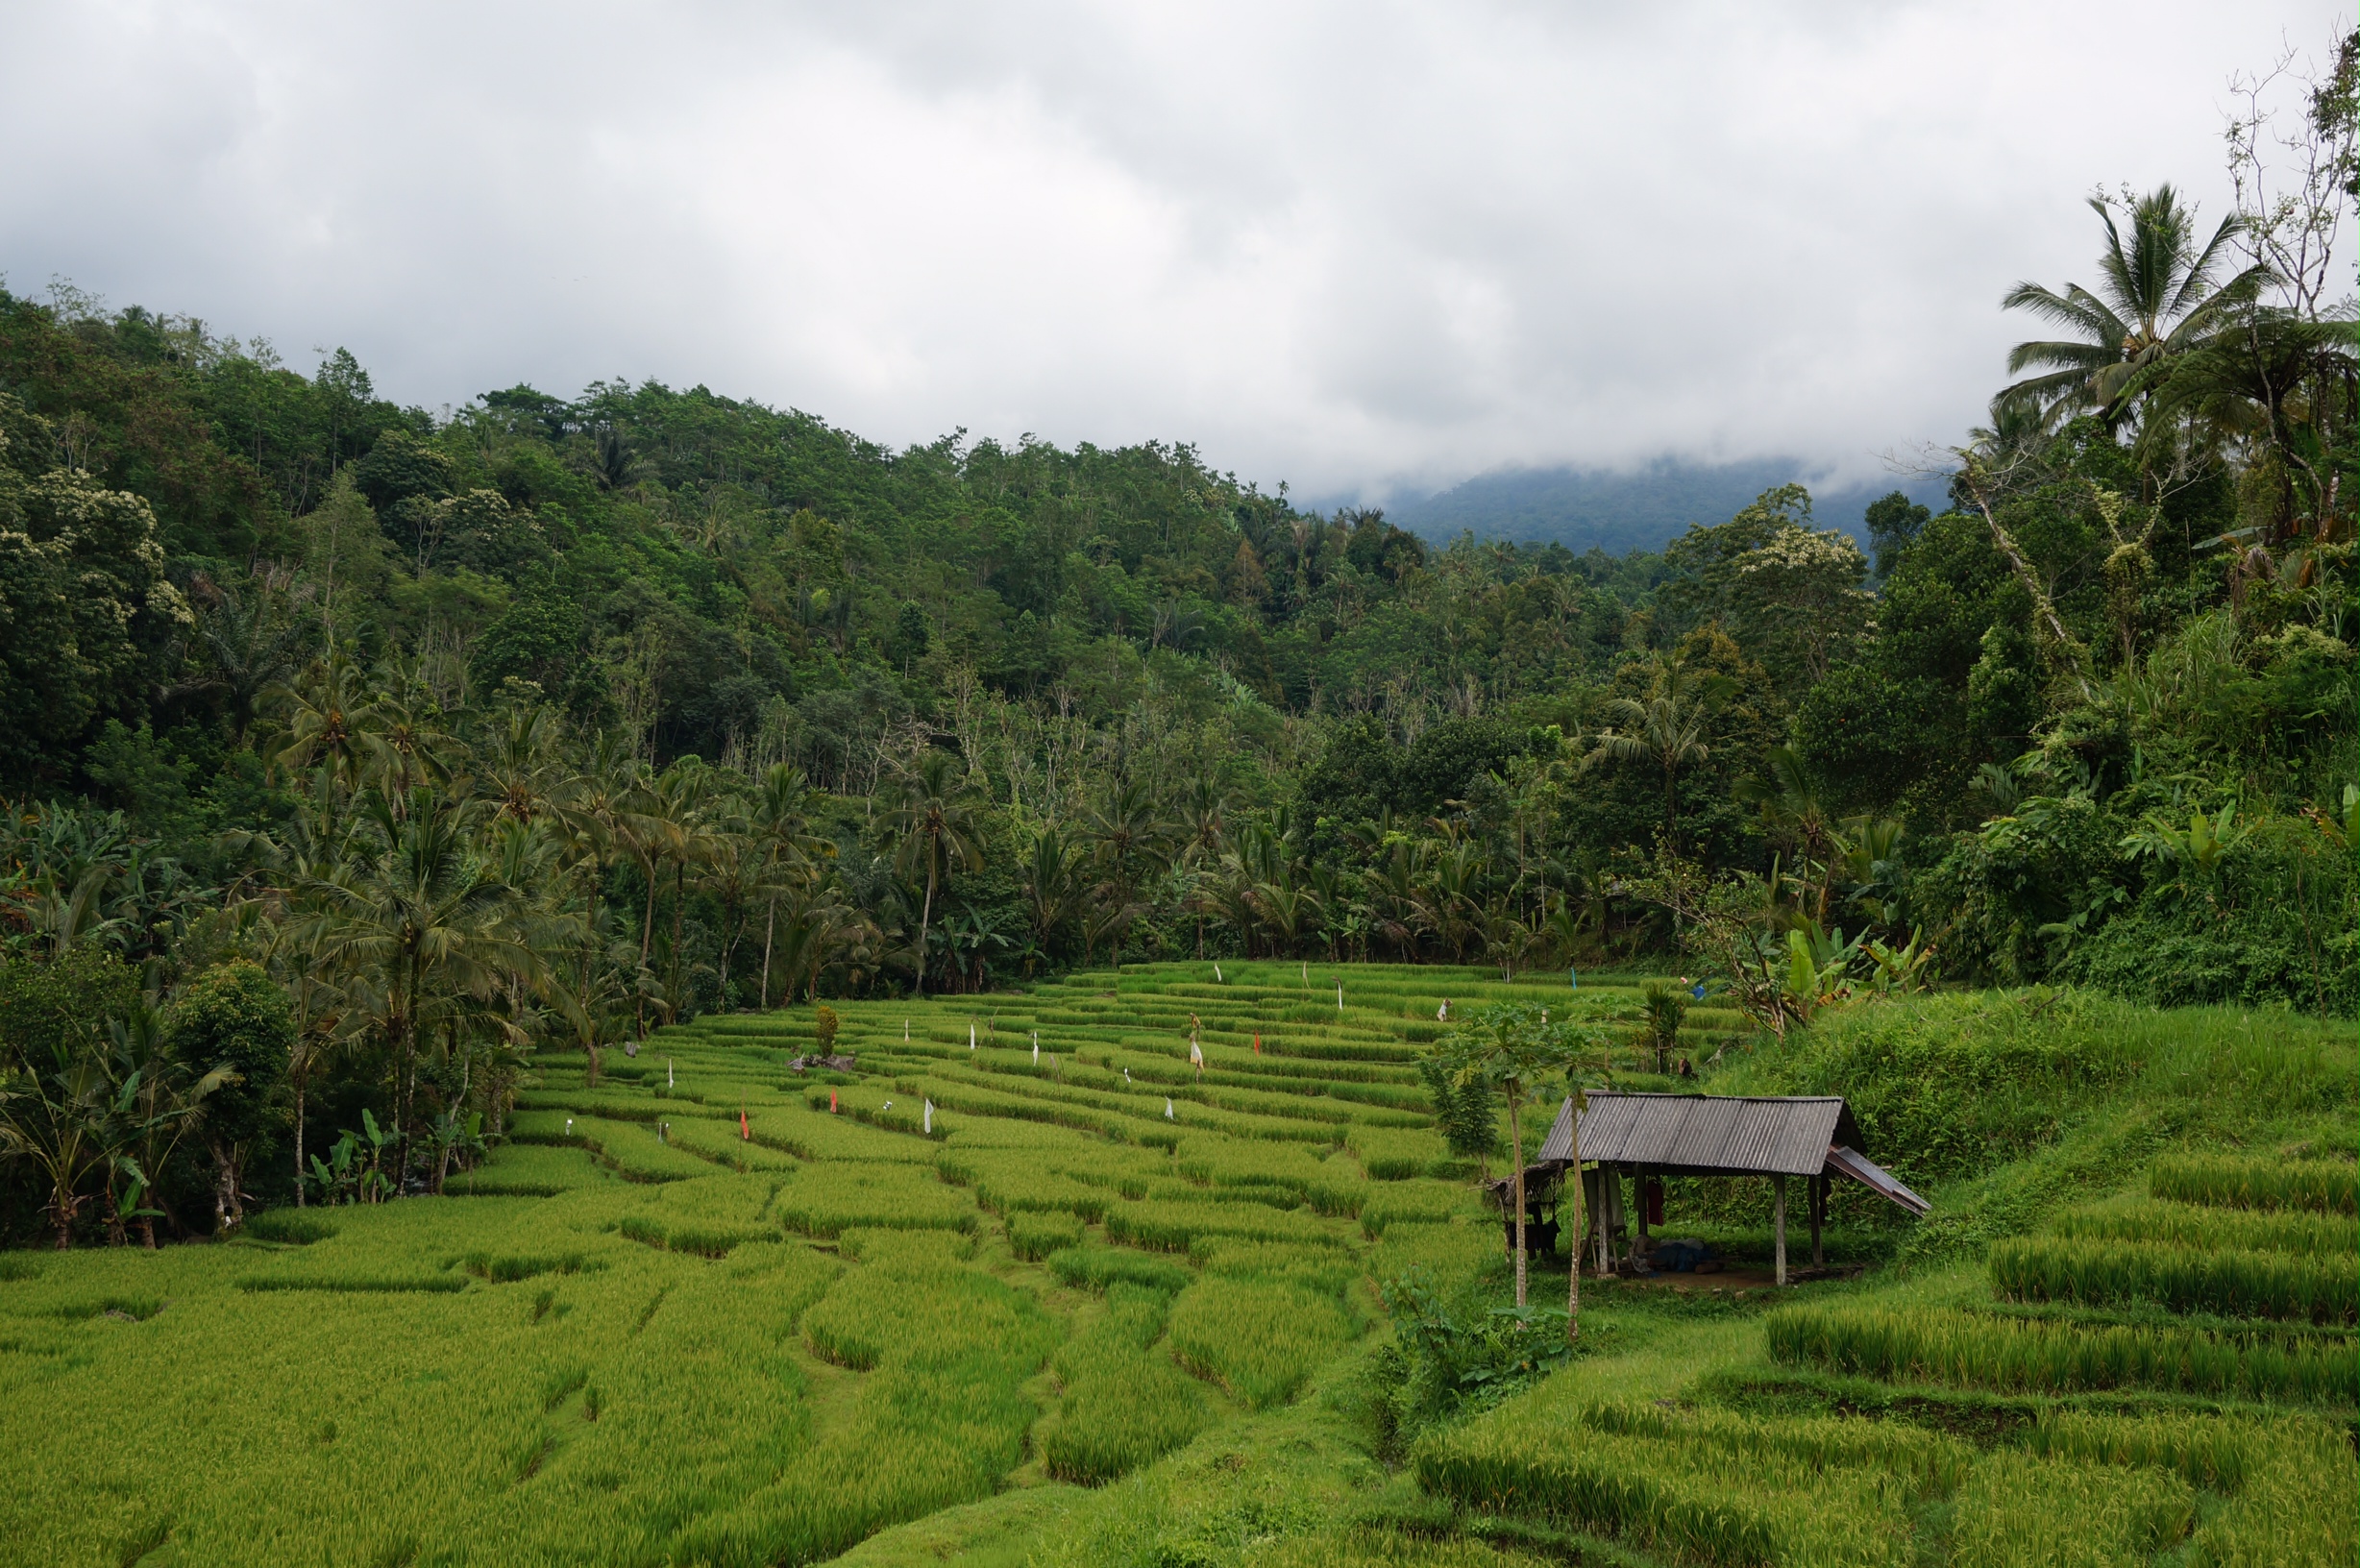 Some rice terraces in Bali, Indonesia